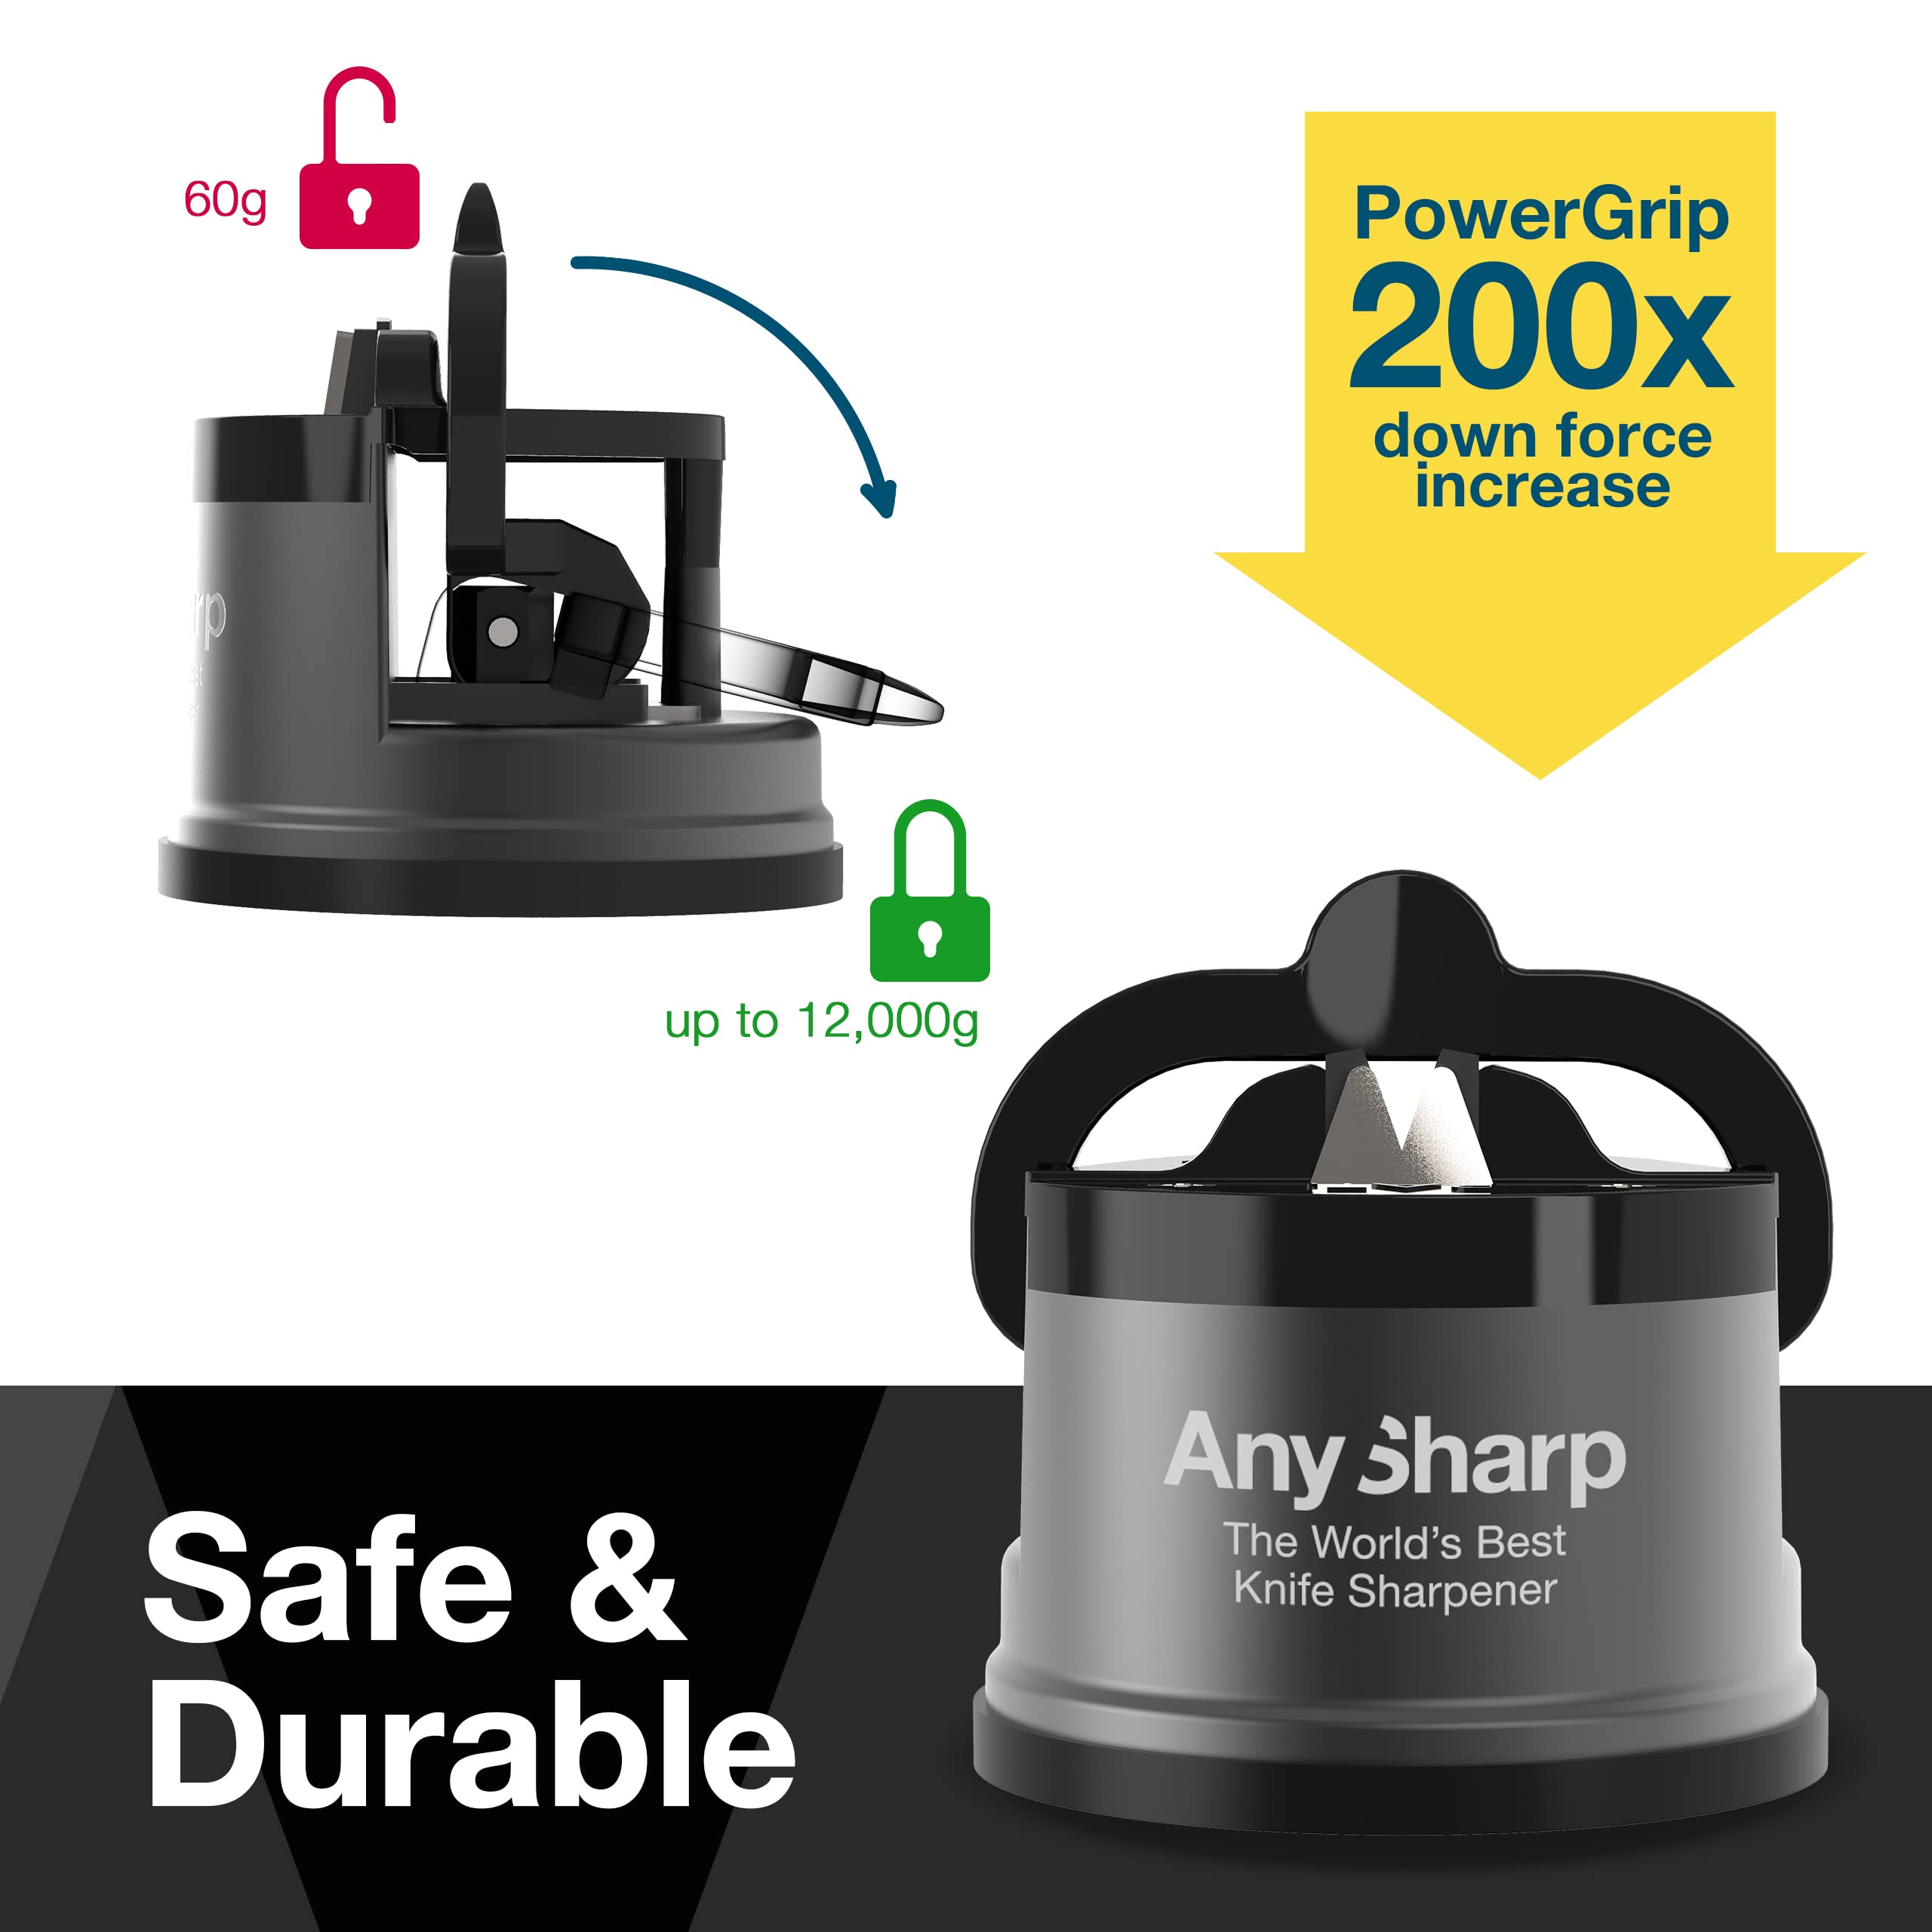 AnySharp Pro - World's Best Knife Sharpener - For All Knives and Serrated Blades